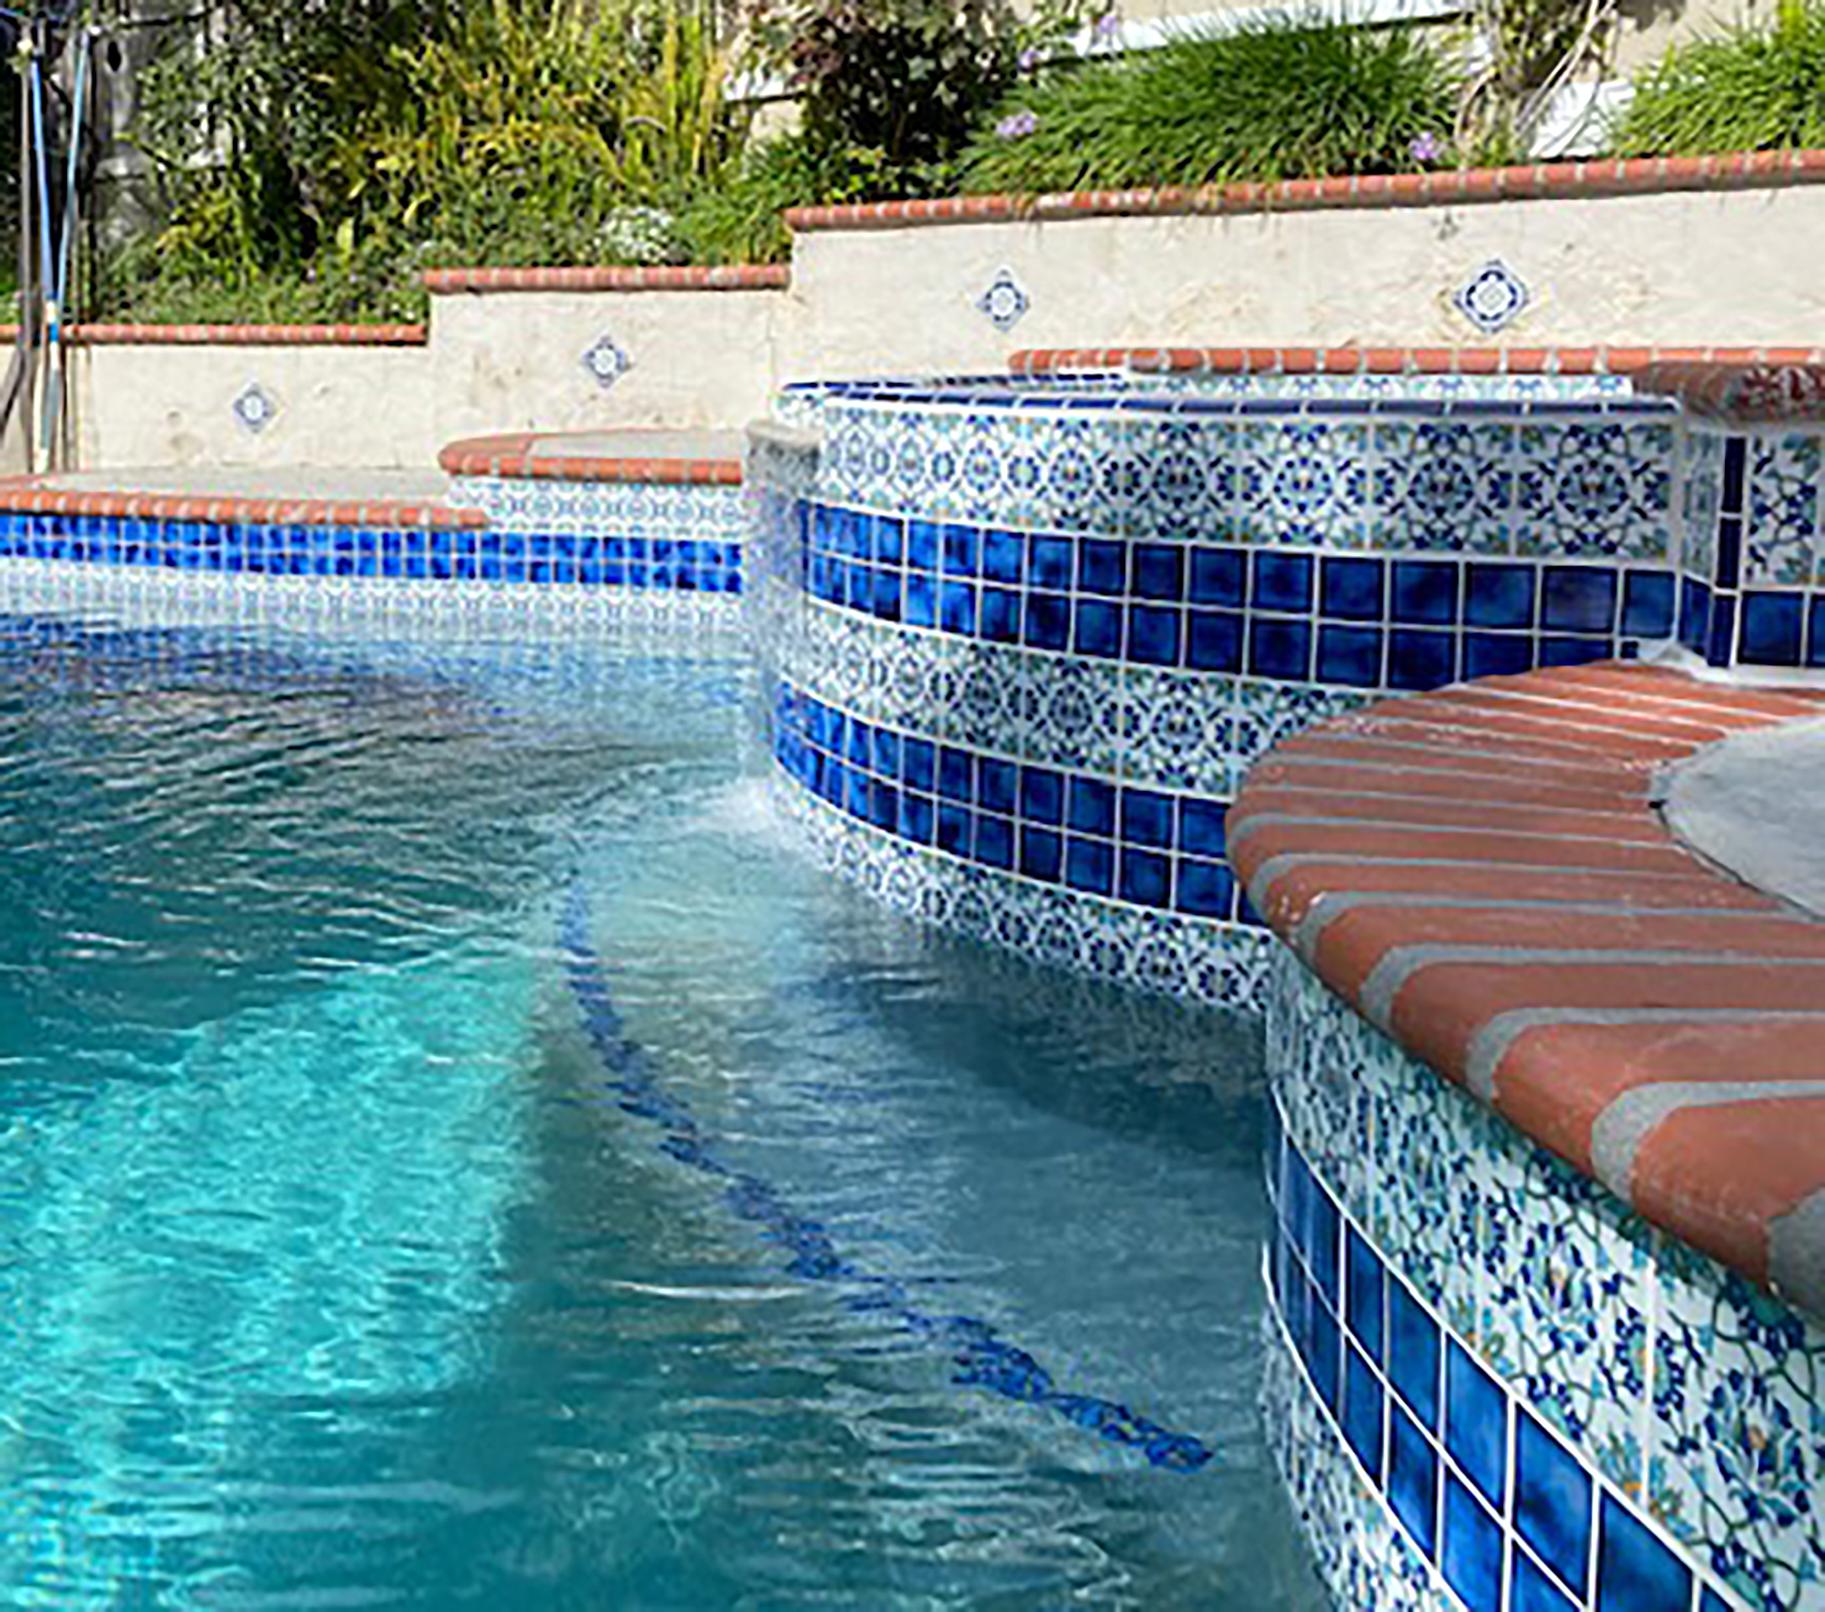 Pool waterline tiles for a pool design idea